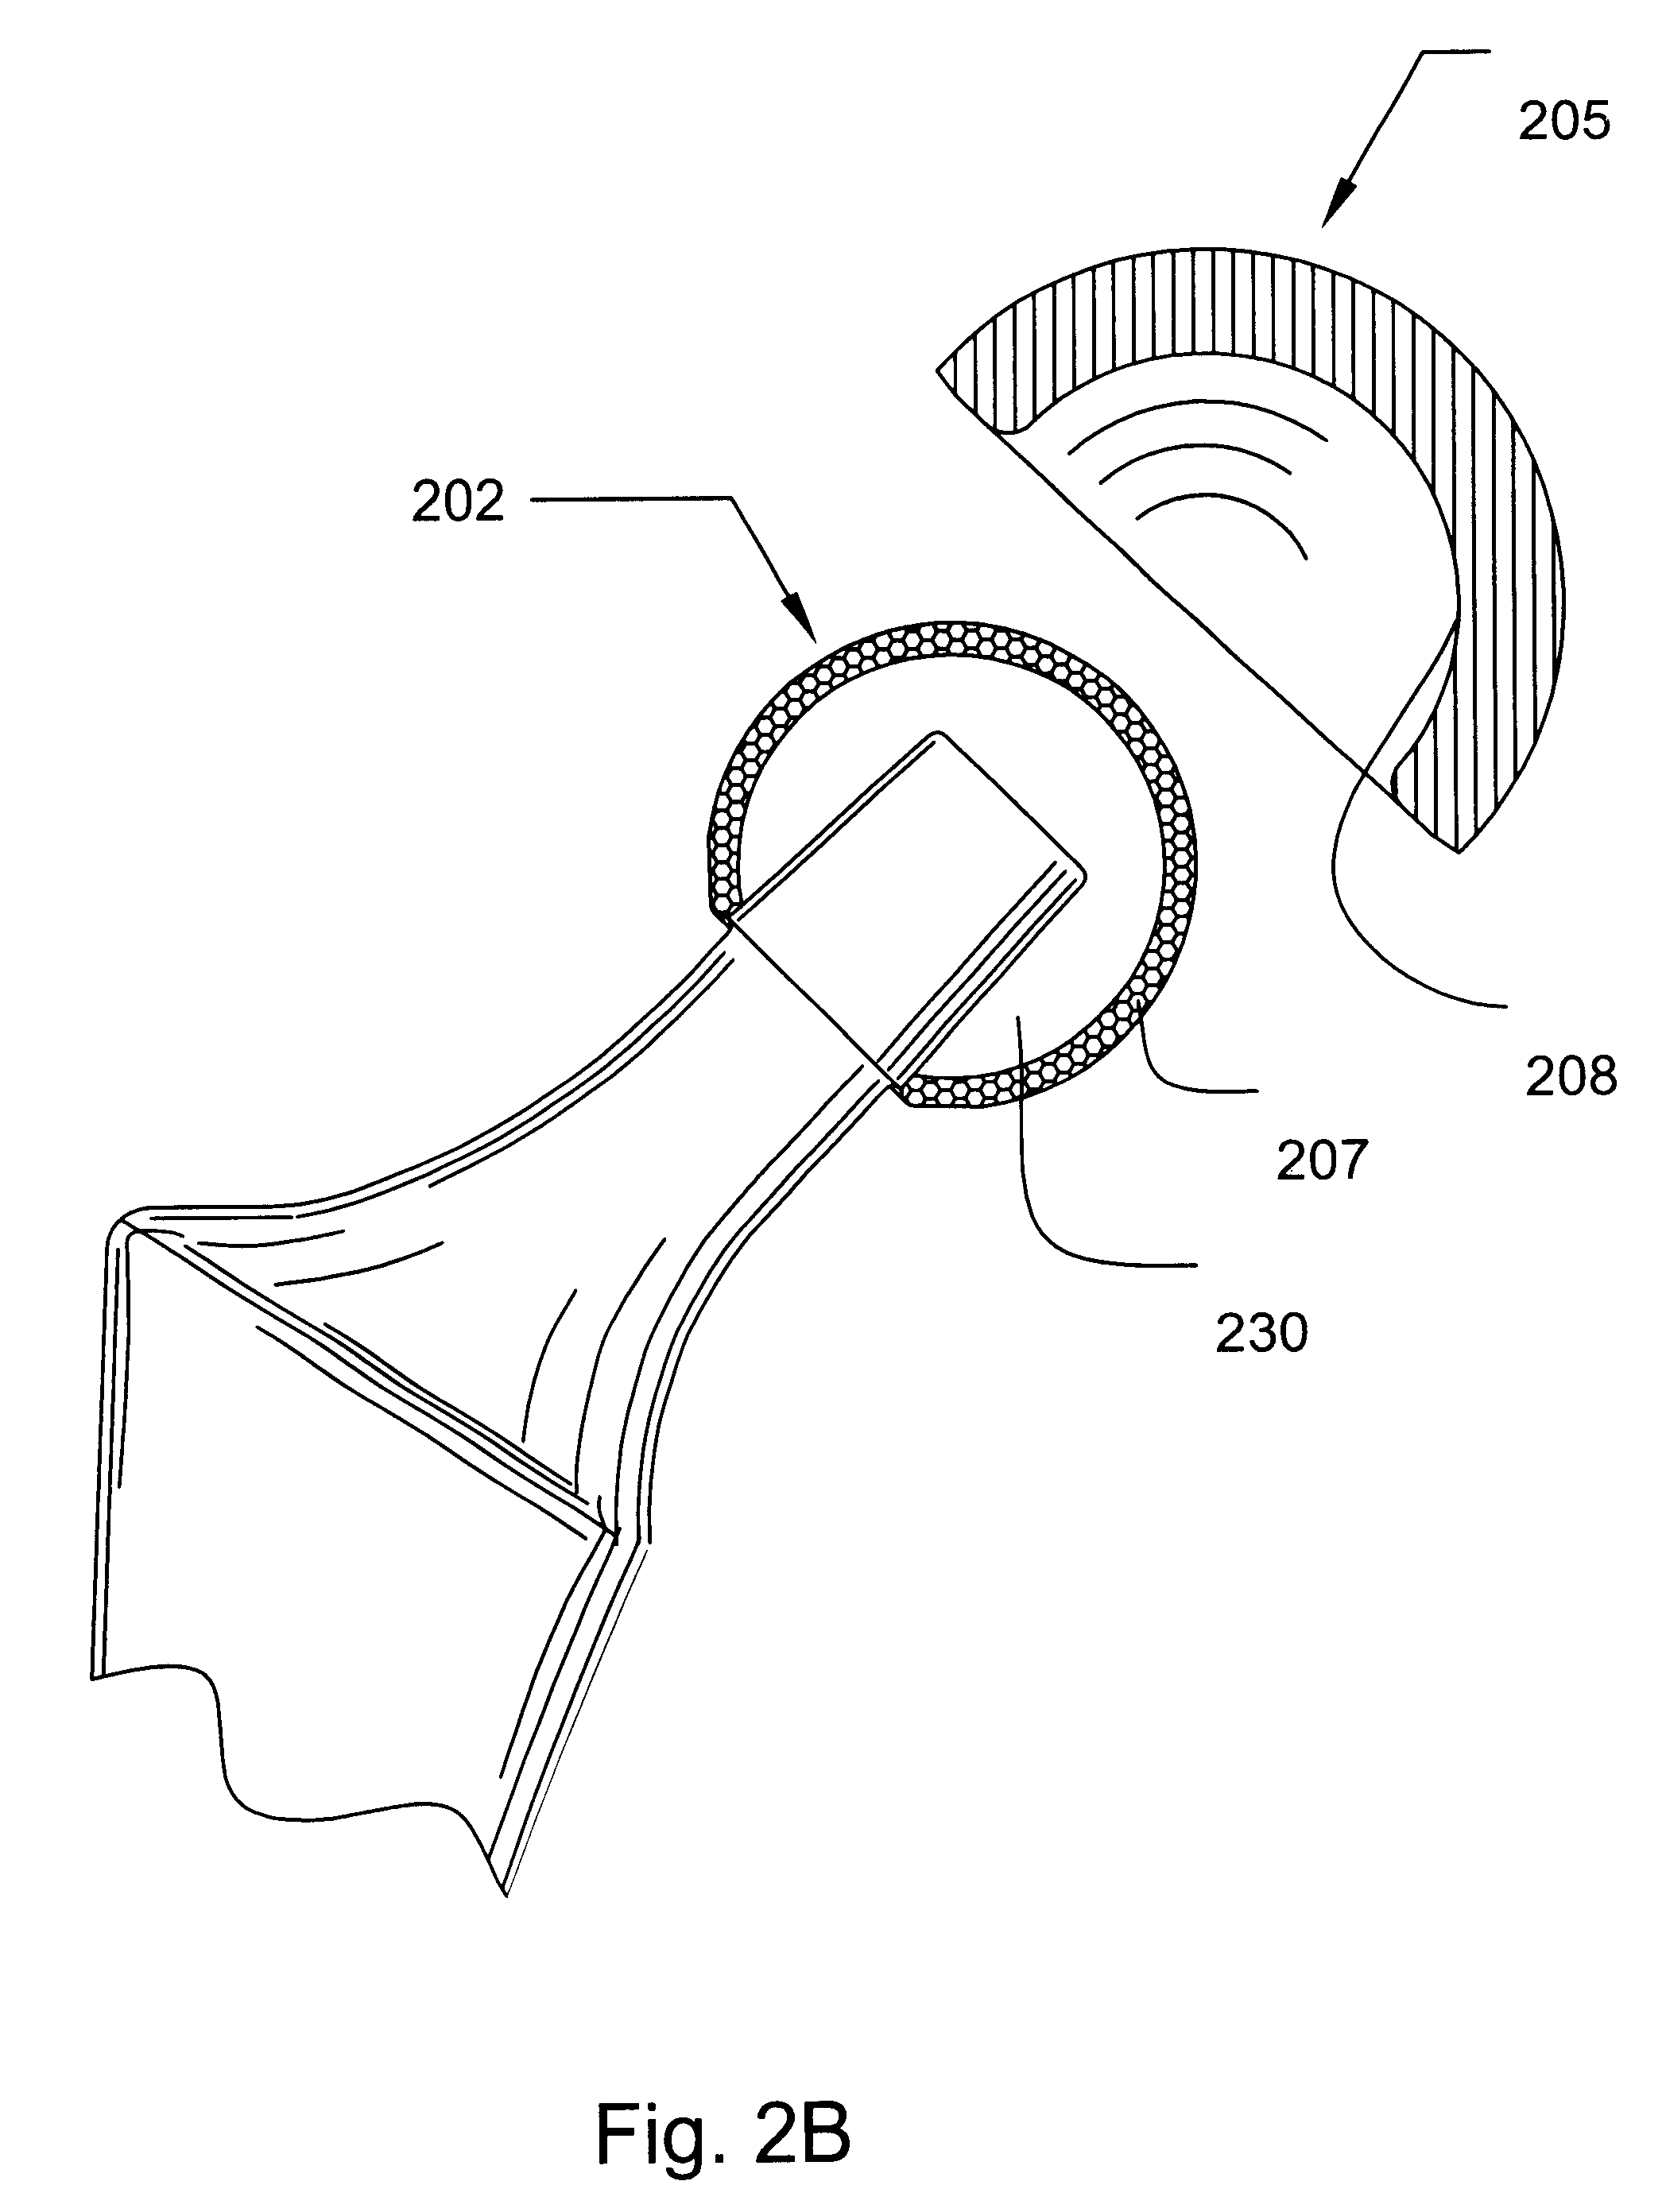 Methods for shaping and finishing prosthetic joint components including polycrystalline diamond compacts